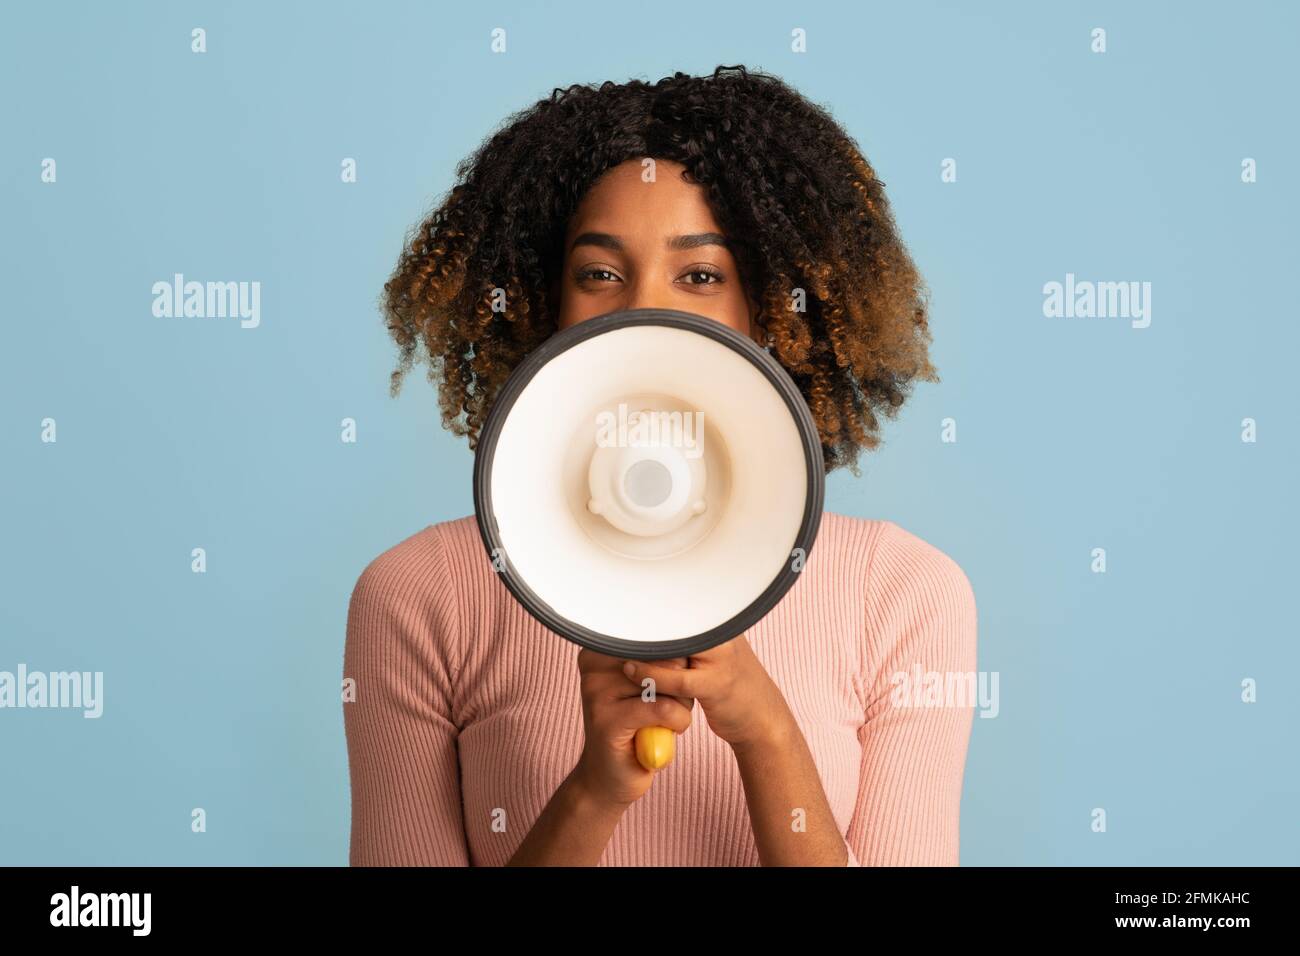 Portrait Of Happy Cheerful Black Woman With Loudspeaker In Hands Sharing Information, Curly African American Female Making Announcement With Megaphone Stock Photo